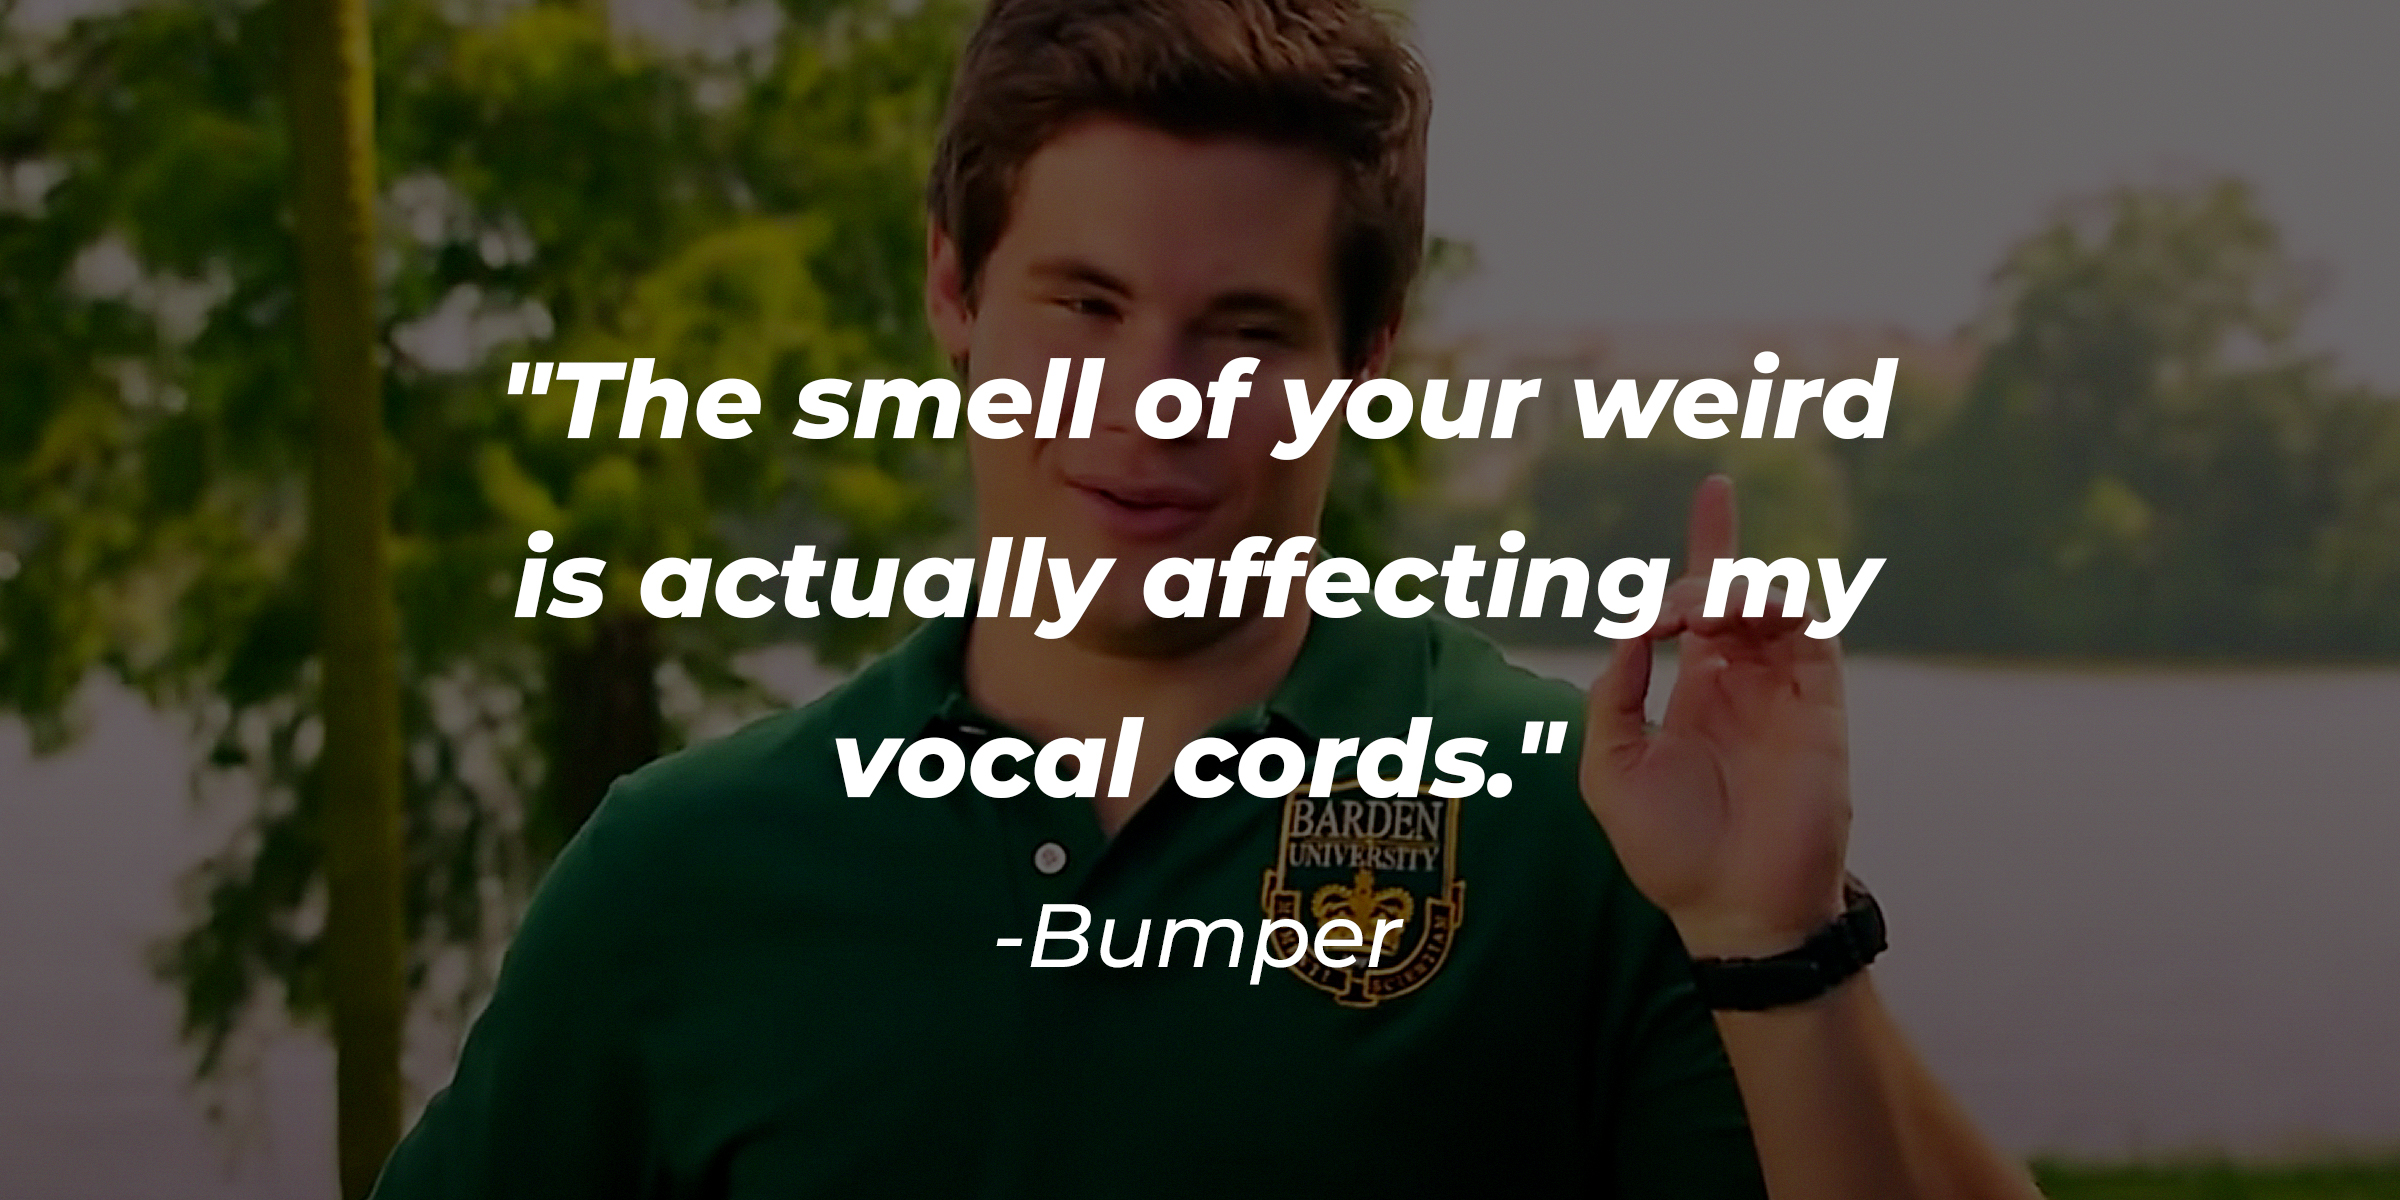 An image of Bumper with the quote, "The smell of your weird is actually affecting my vocal cords." | Source: Getty Images